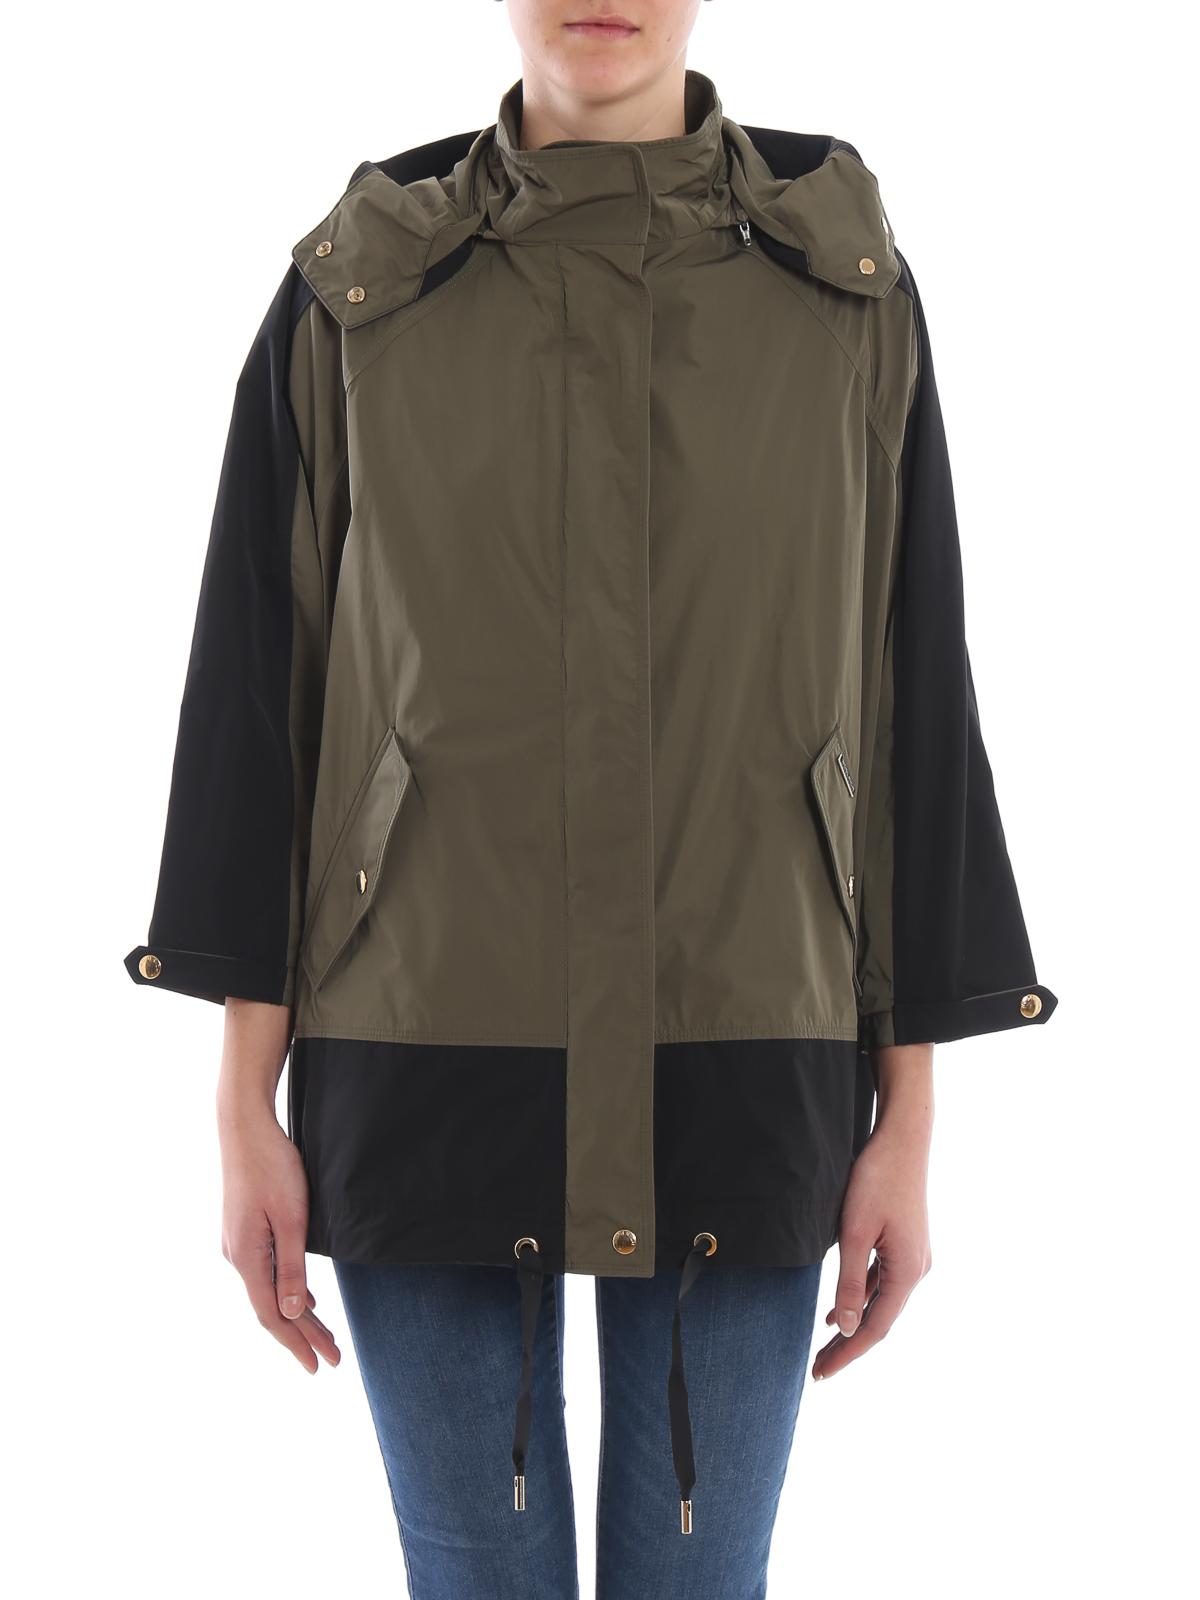 Casual jackets Woolrich - Beaver army green and black anorak 